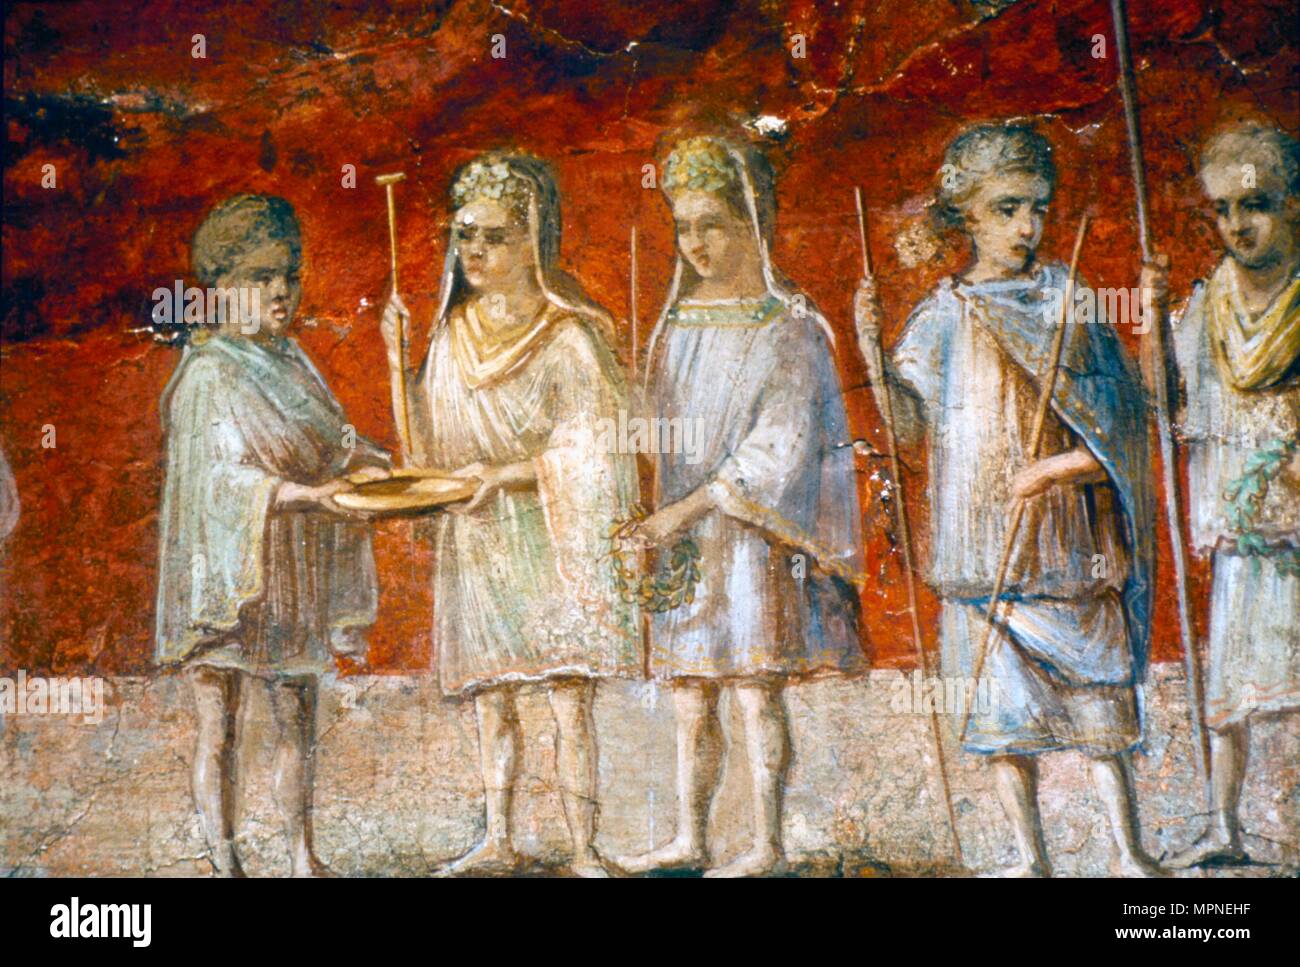 Children in religious procession, Roman wall painting from Ostia, c2nd-3rd century. Artist: Unknown. Stock Photo